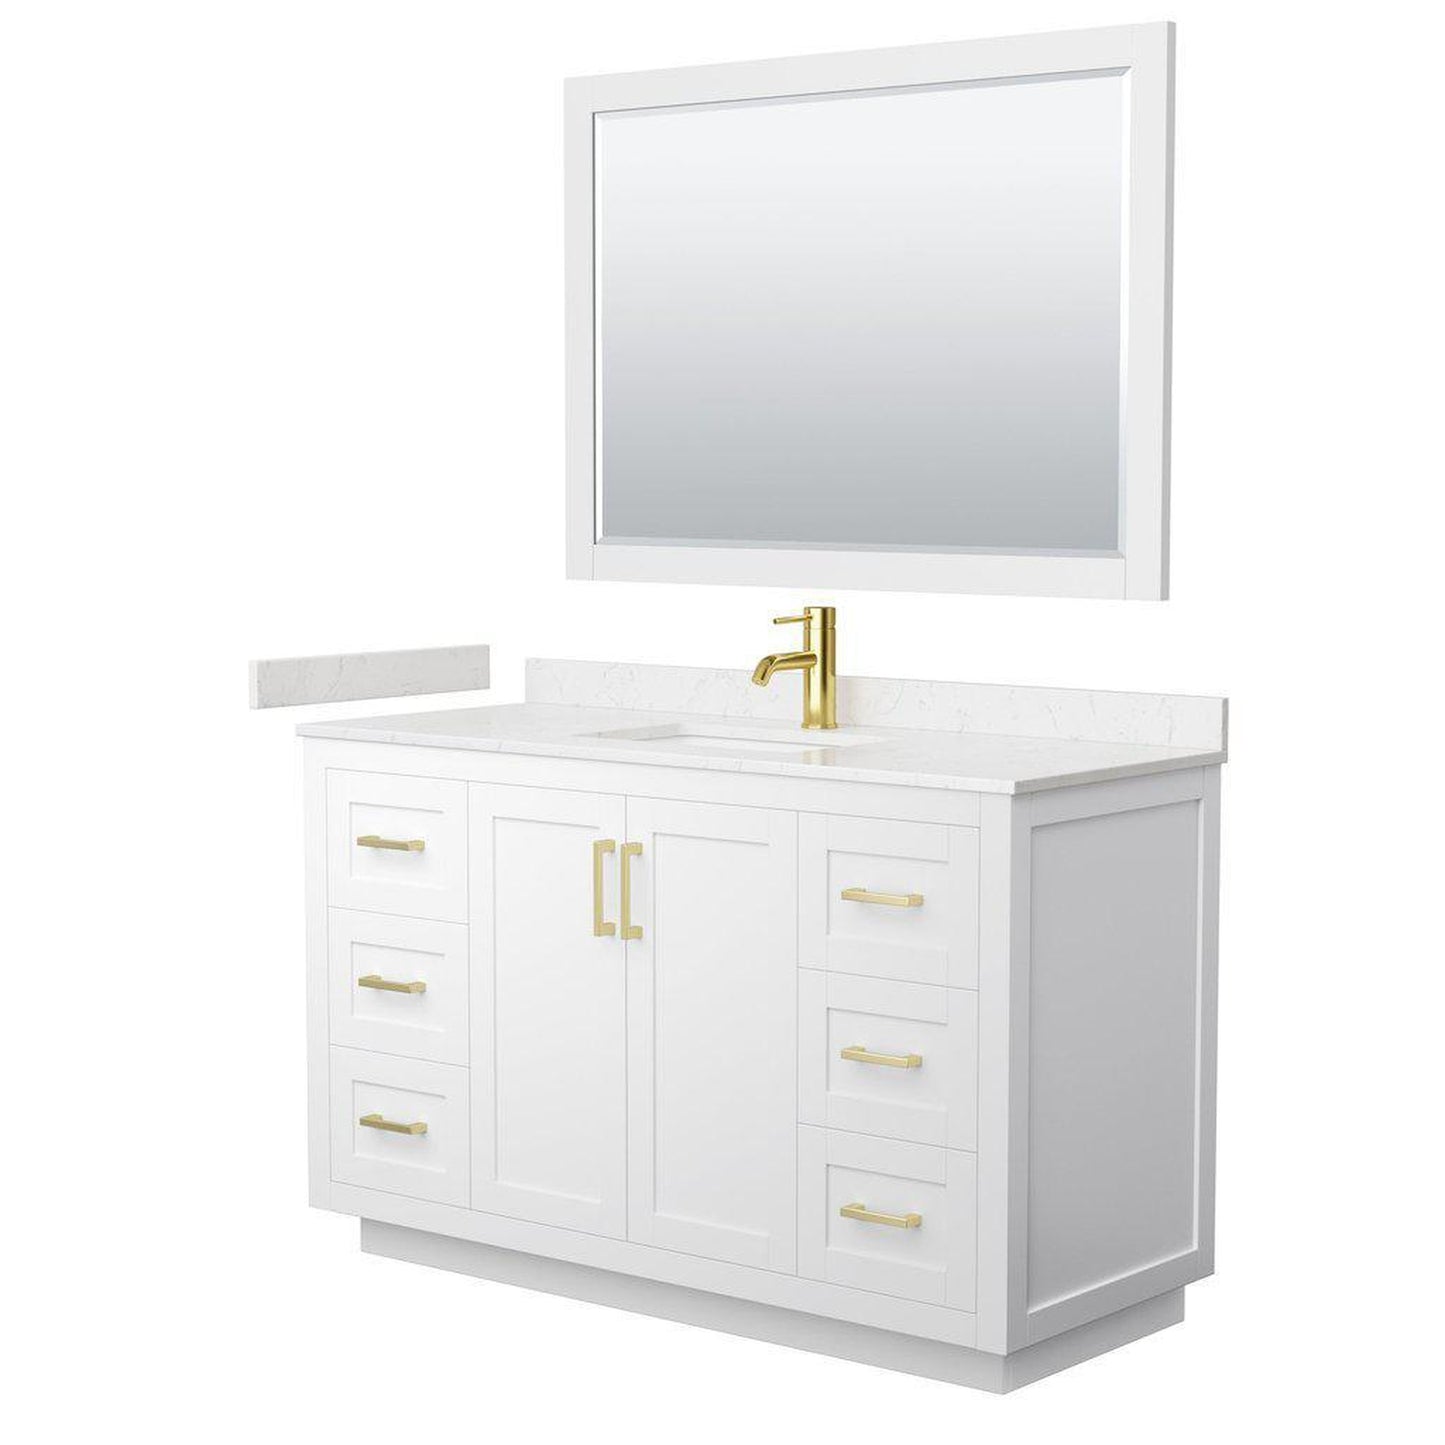 Wyndham Collection Miranda 54" Single Bathroom White Vanity Set With Light-Vein Carrara Cultured Marble Countertop, Undermount Square Sink, 46" Mirror And Brushed Gold Trim